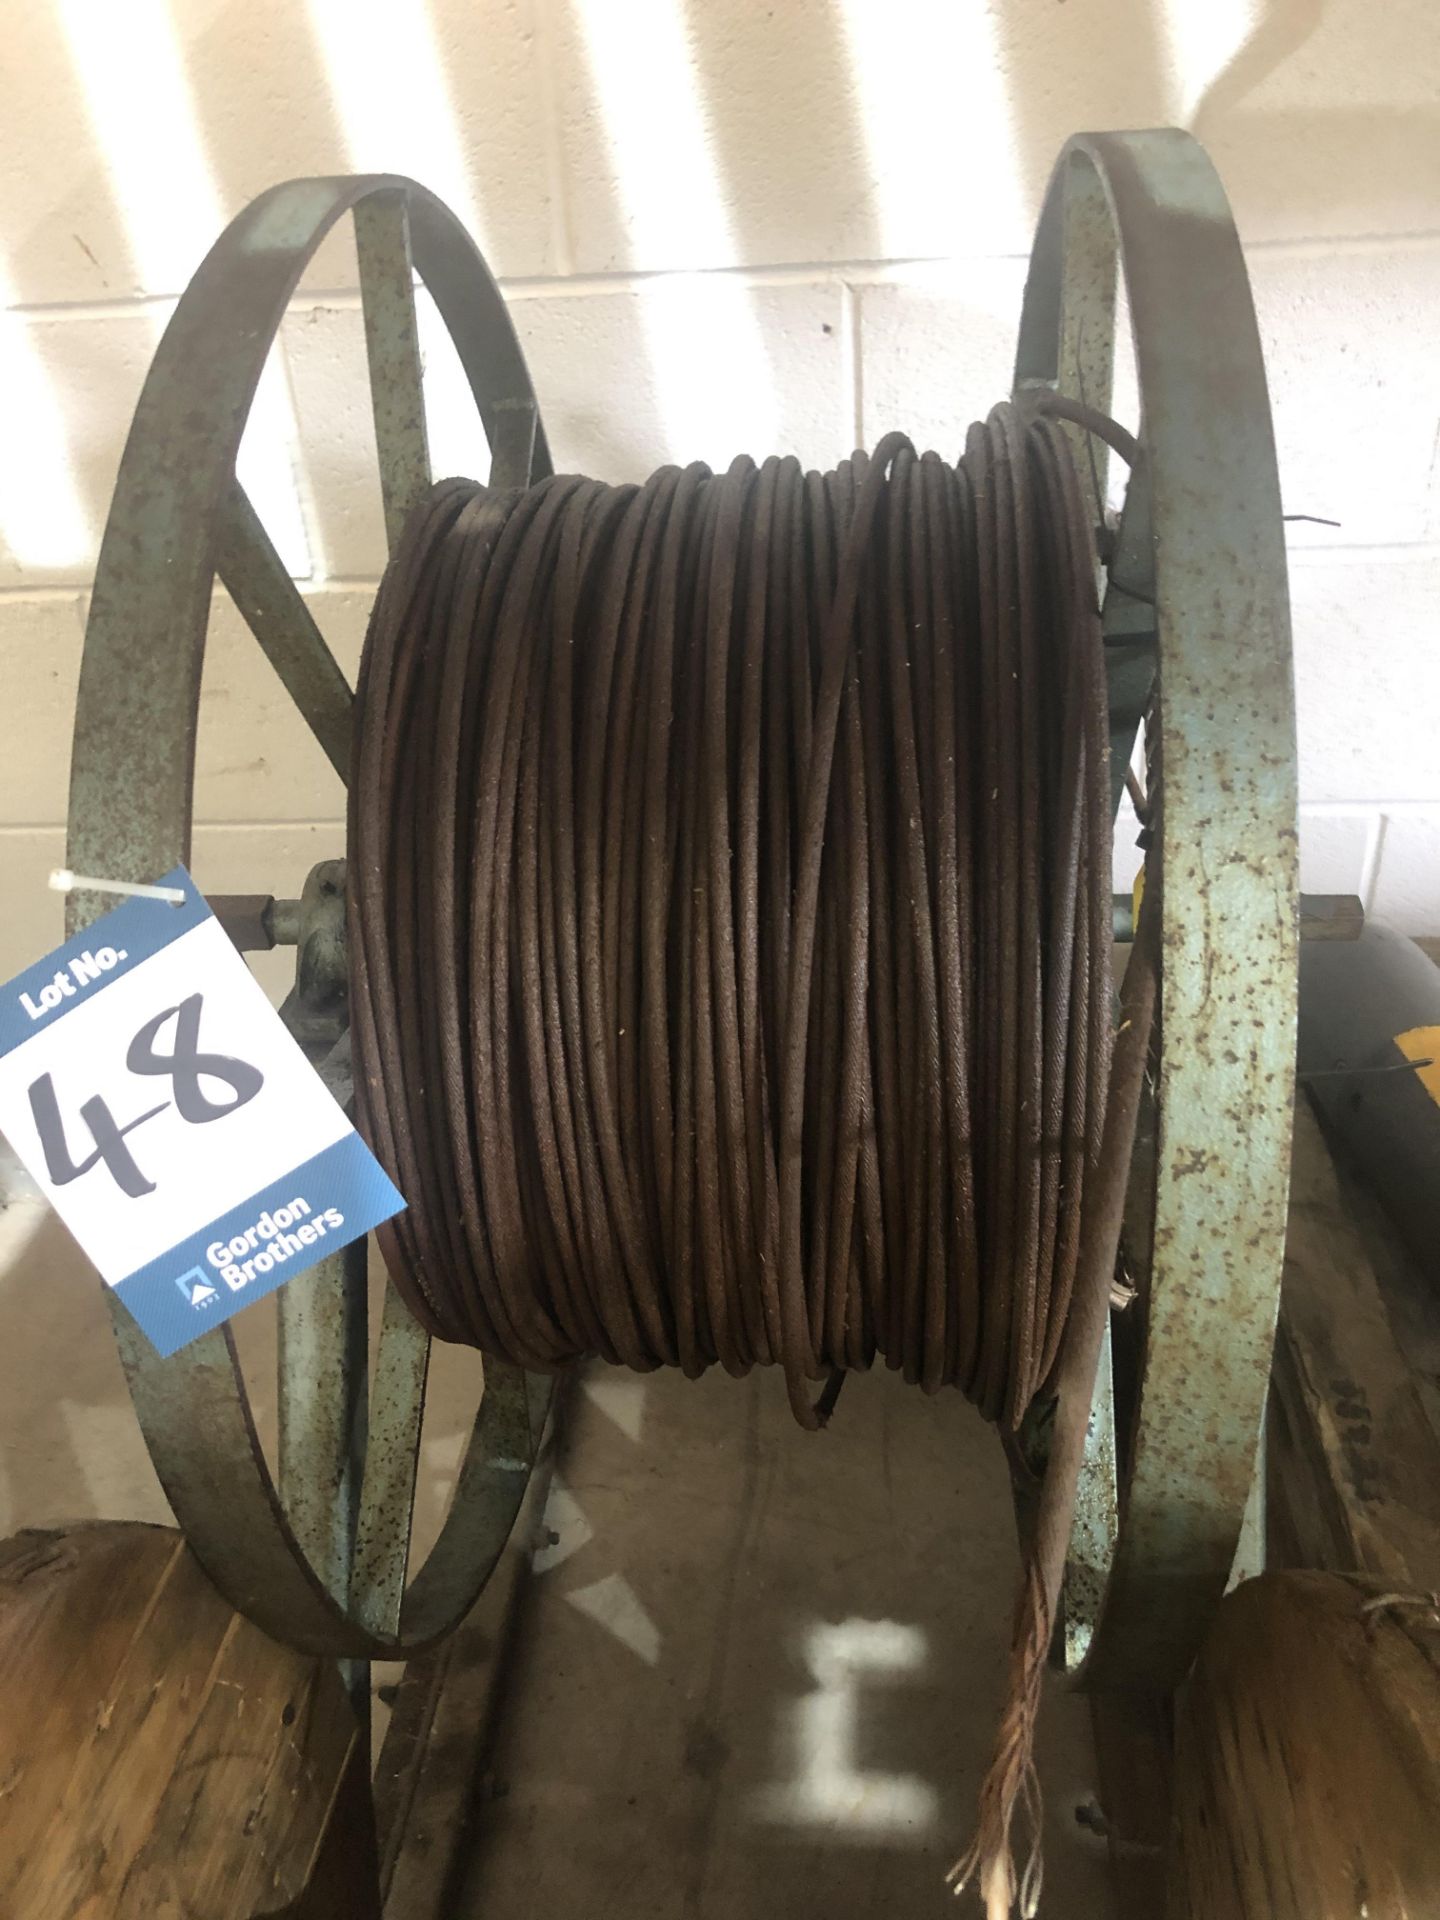 Rochester, 50 Ohm armoured co axial cable and steel framed dispenser reel